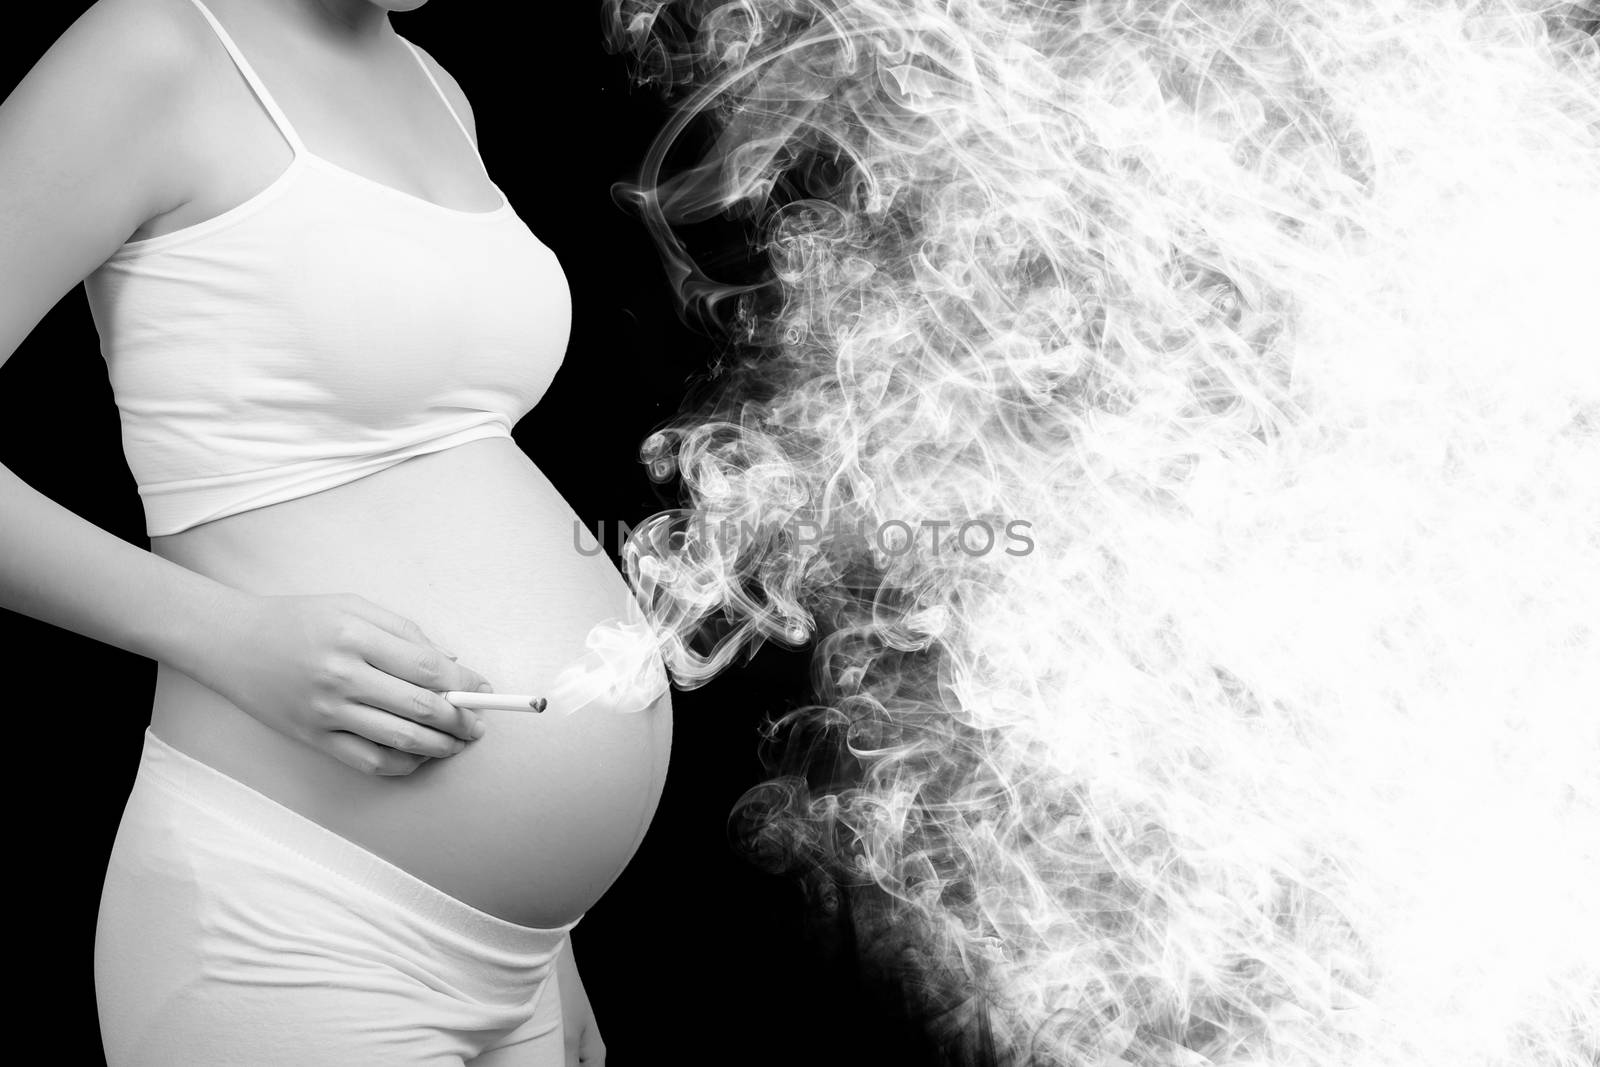 Smoking kills concept : Pregnant woman smoking cigarette cause cancer , danger and lethal health risks for parent and baby. Empty place for text. Black and white color. Stop smoking campaign